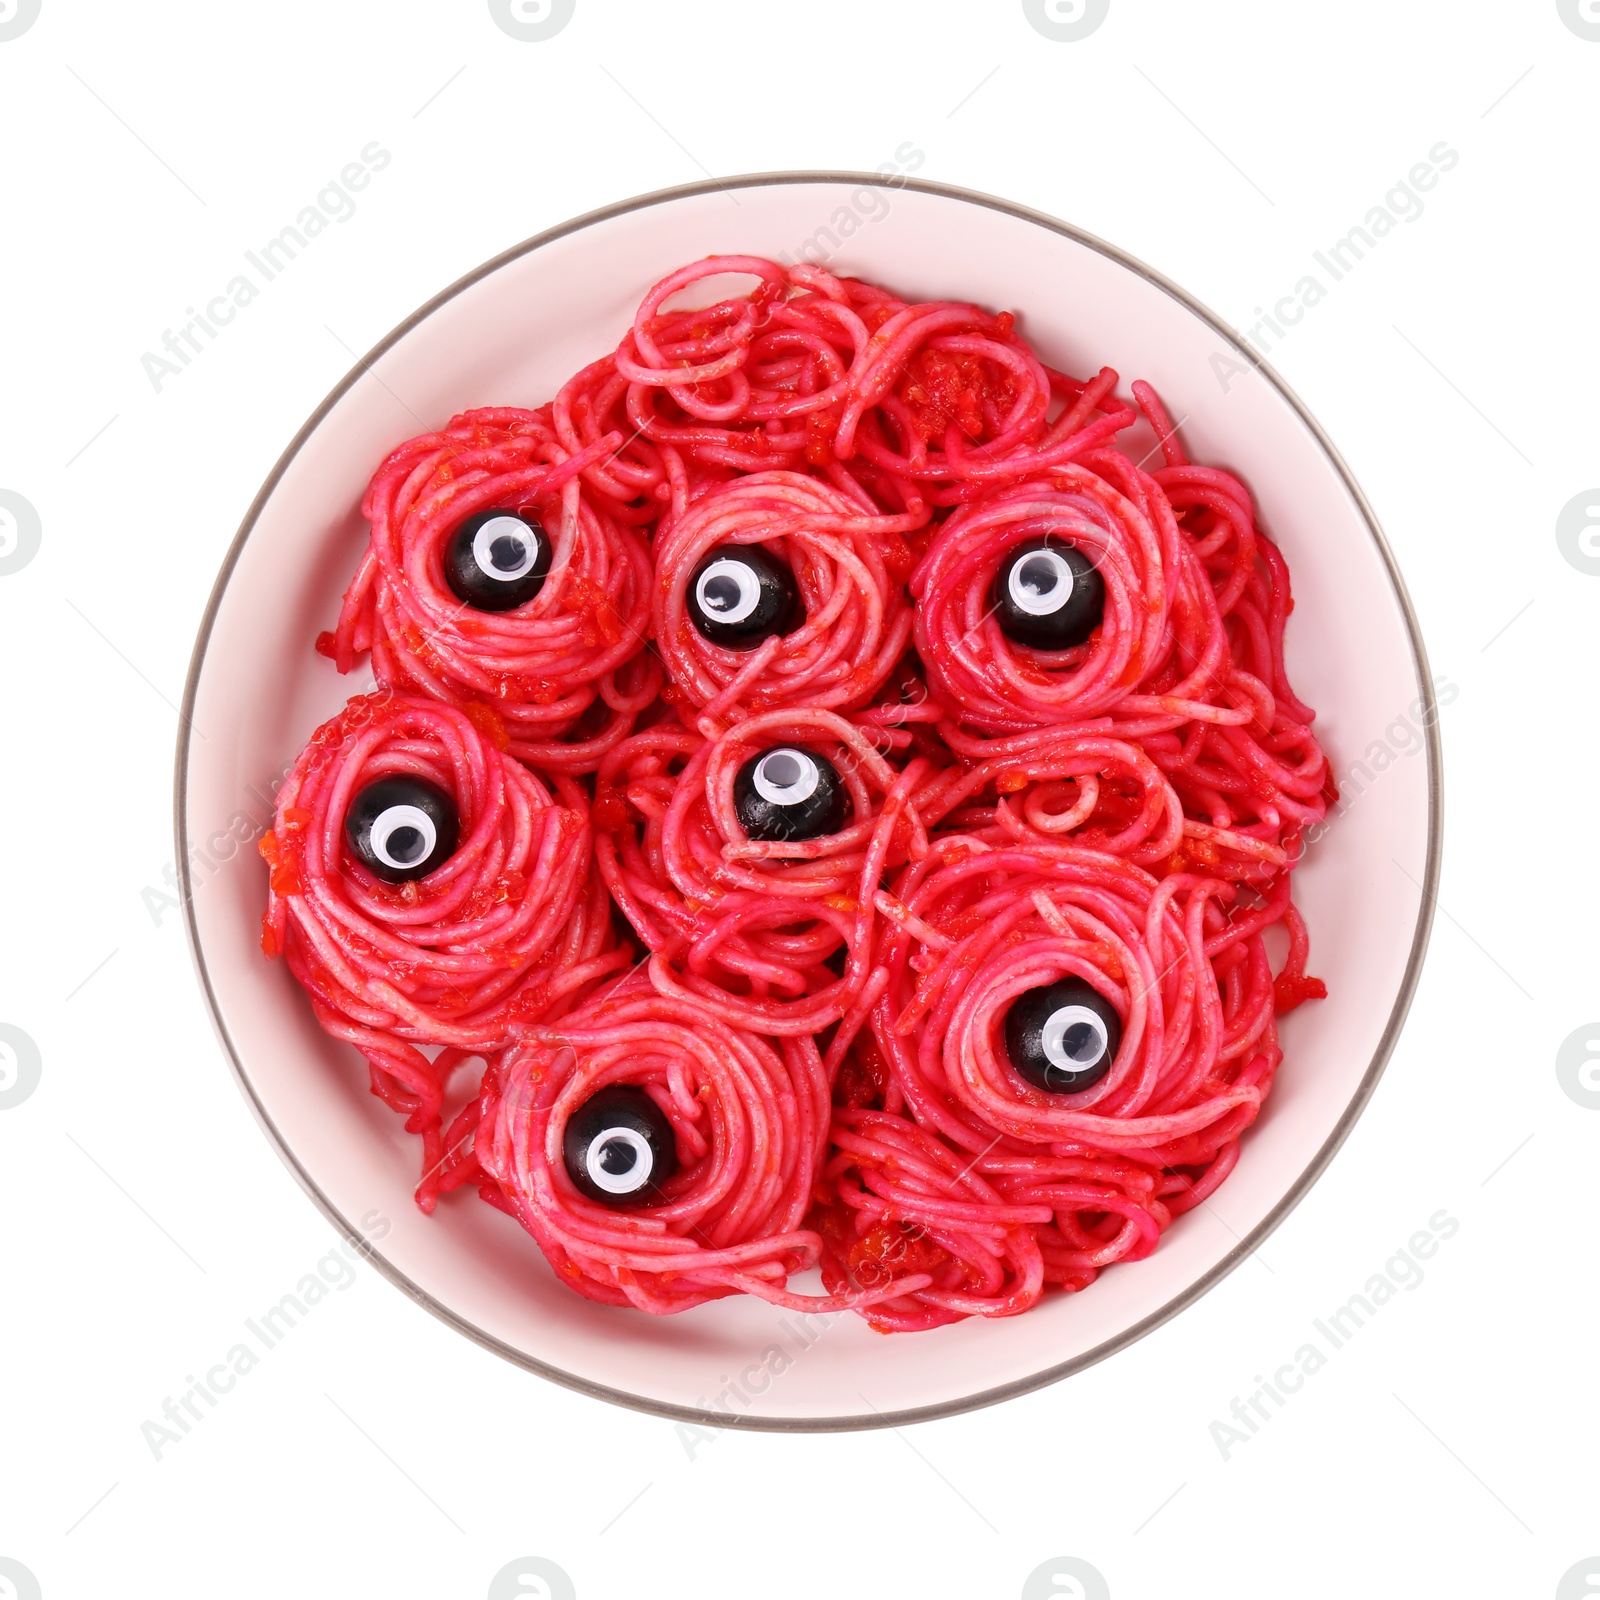 Photo of Red pasta with decorative eyes and olives in bowl isolated on white, top view. Halloween food